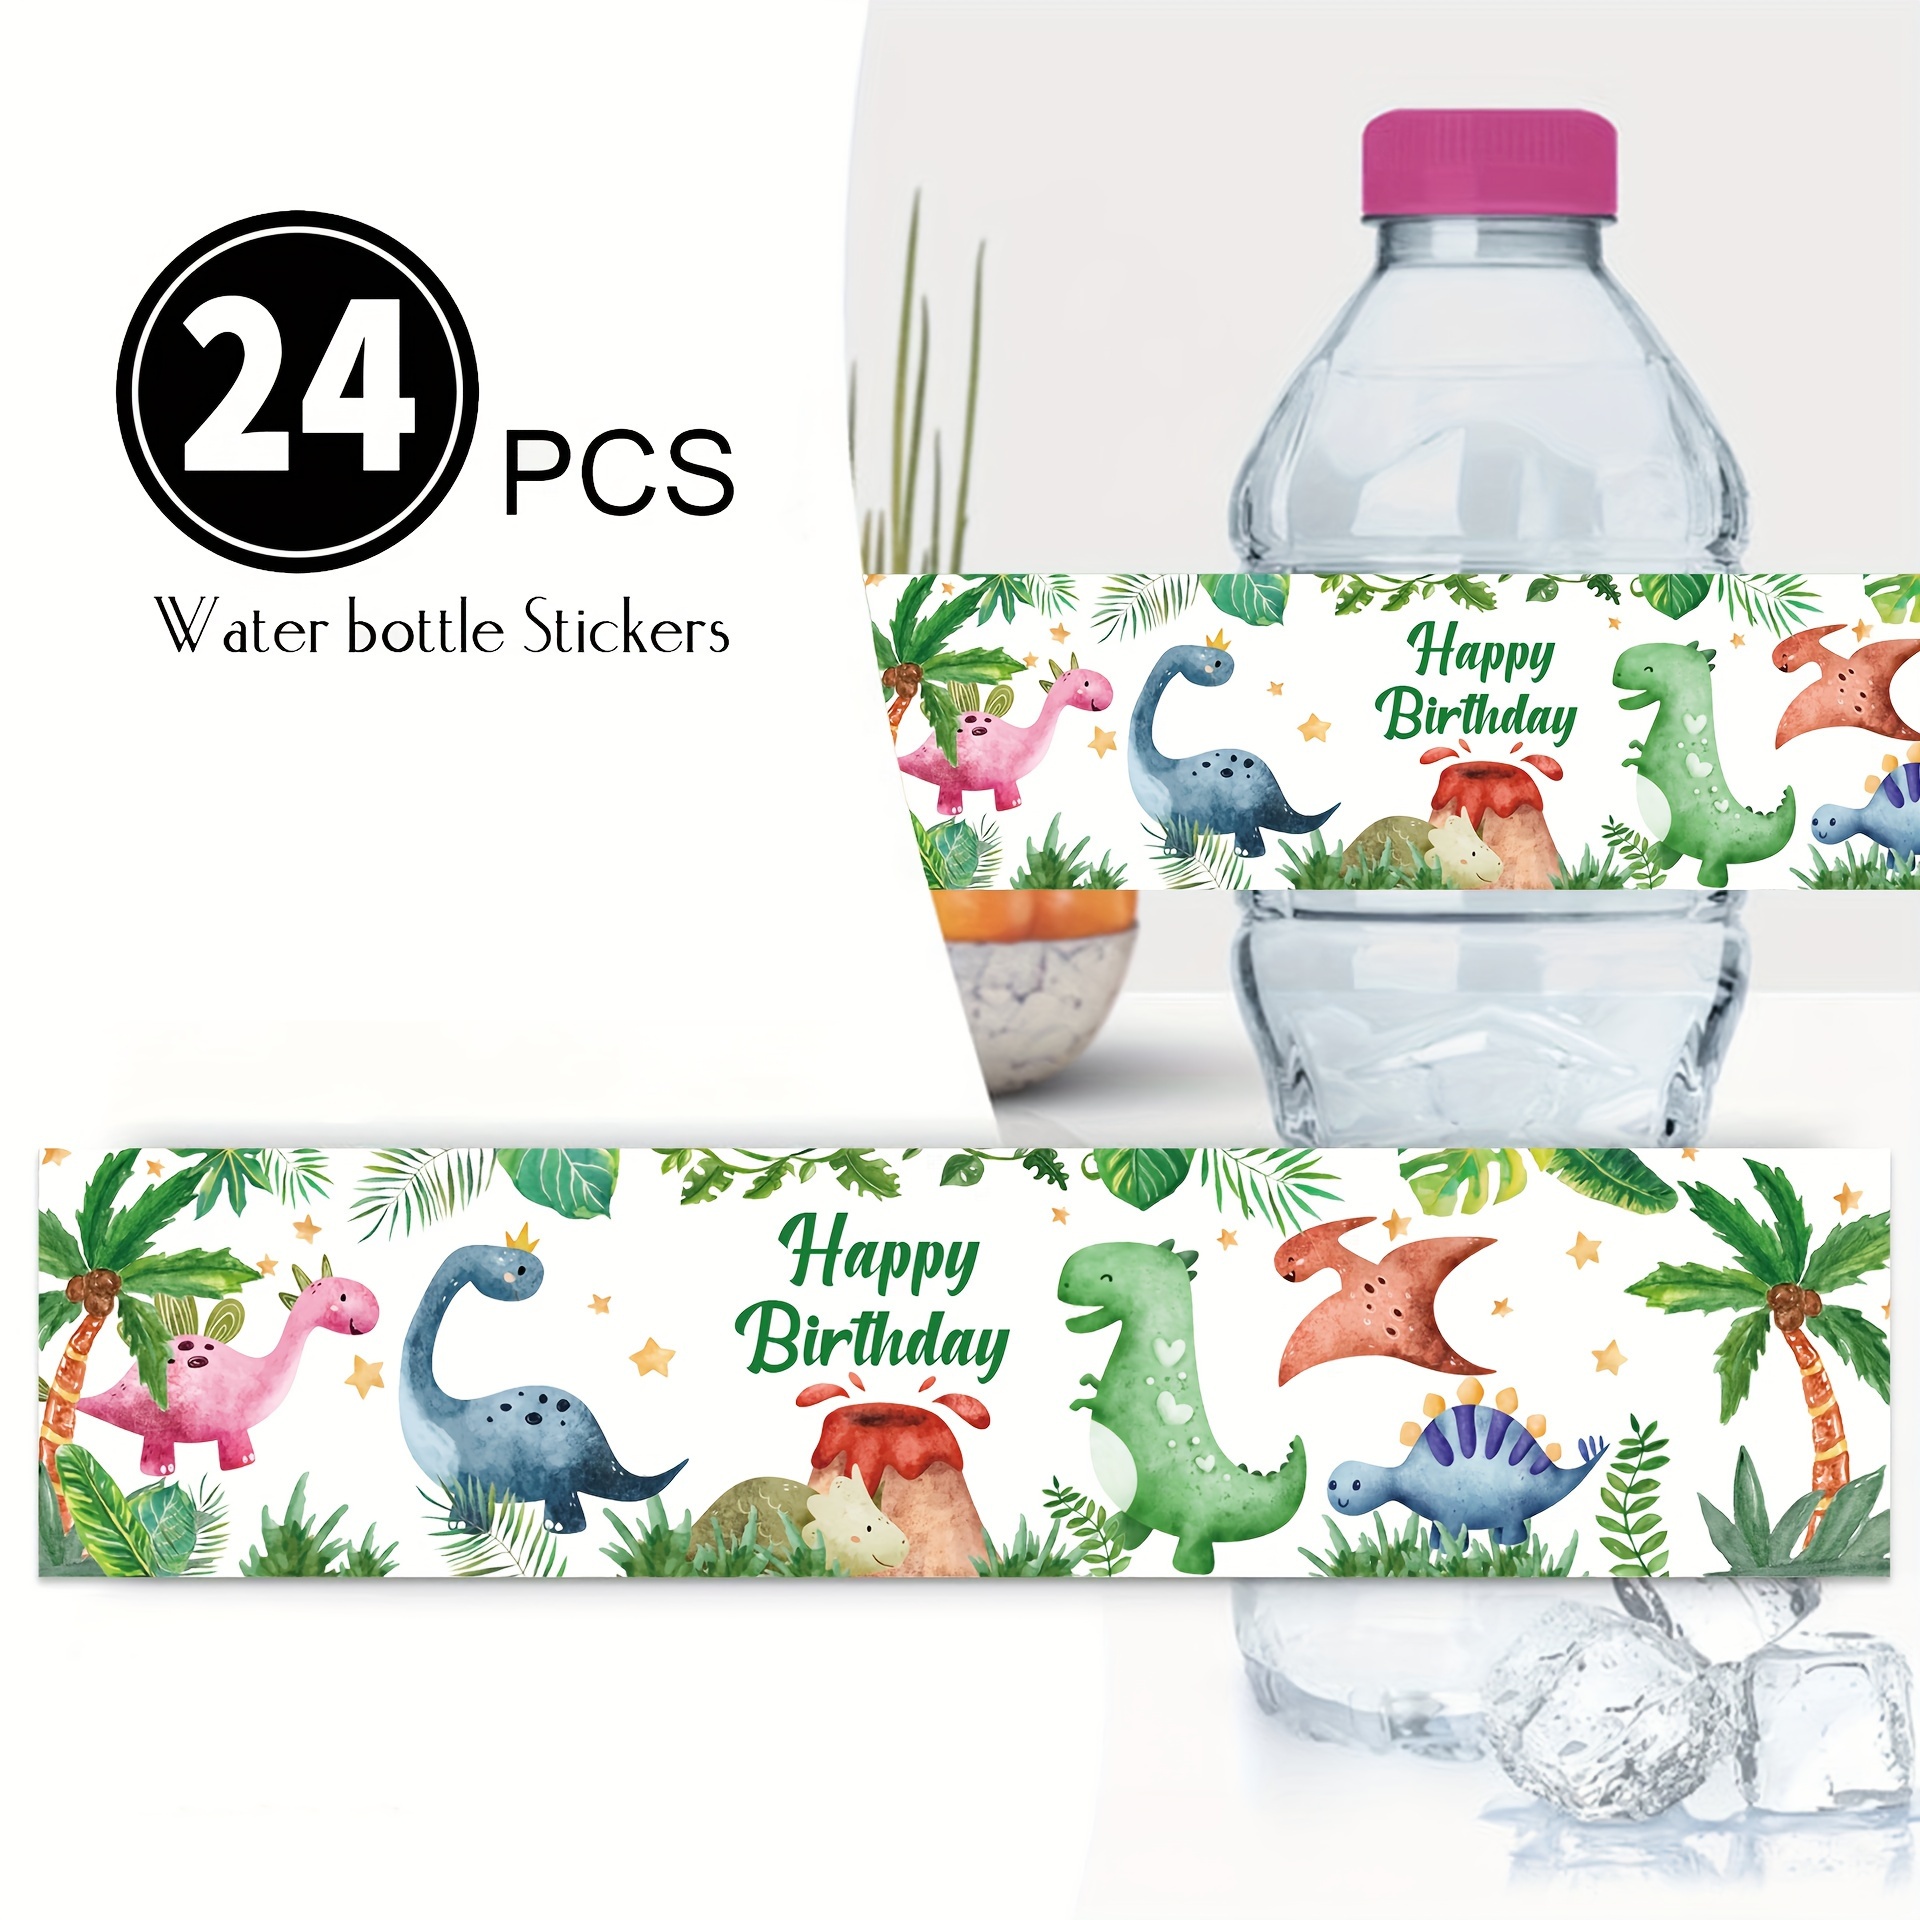 

24pcs Dinosaur Park Themed Disposable Water Bottle Stickers For Birthday Parties & Diy Beverage Decorations Dinosaur Party Decorations Dinosaur Birthday Party Supplies